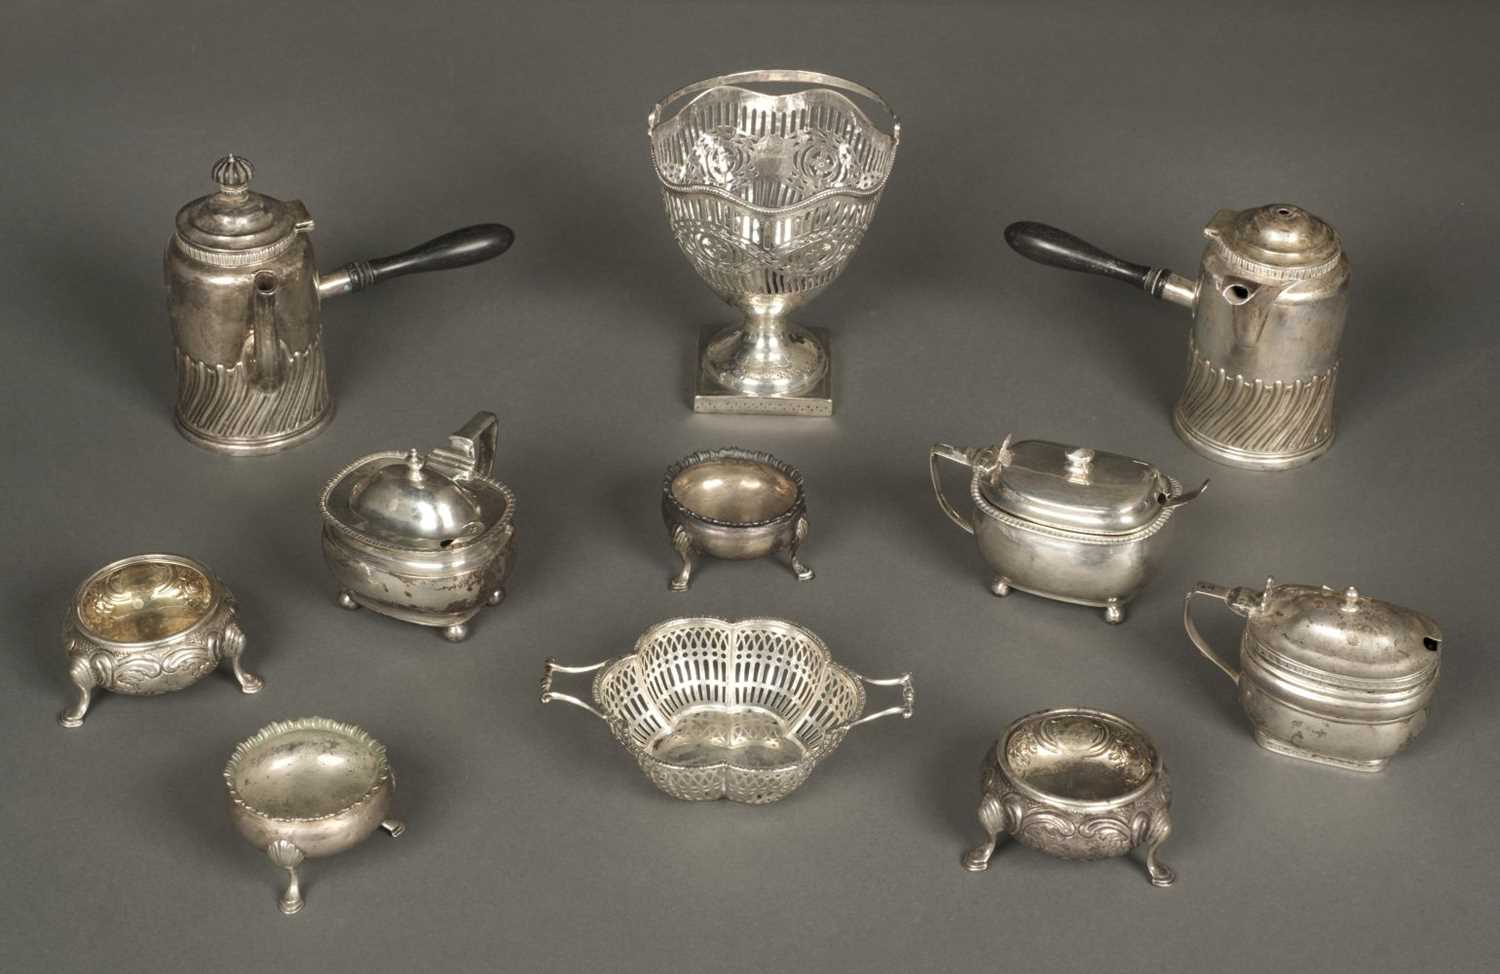 Lot 31 - Mixed Silver. A collection of silver